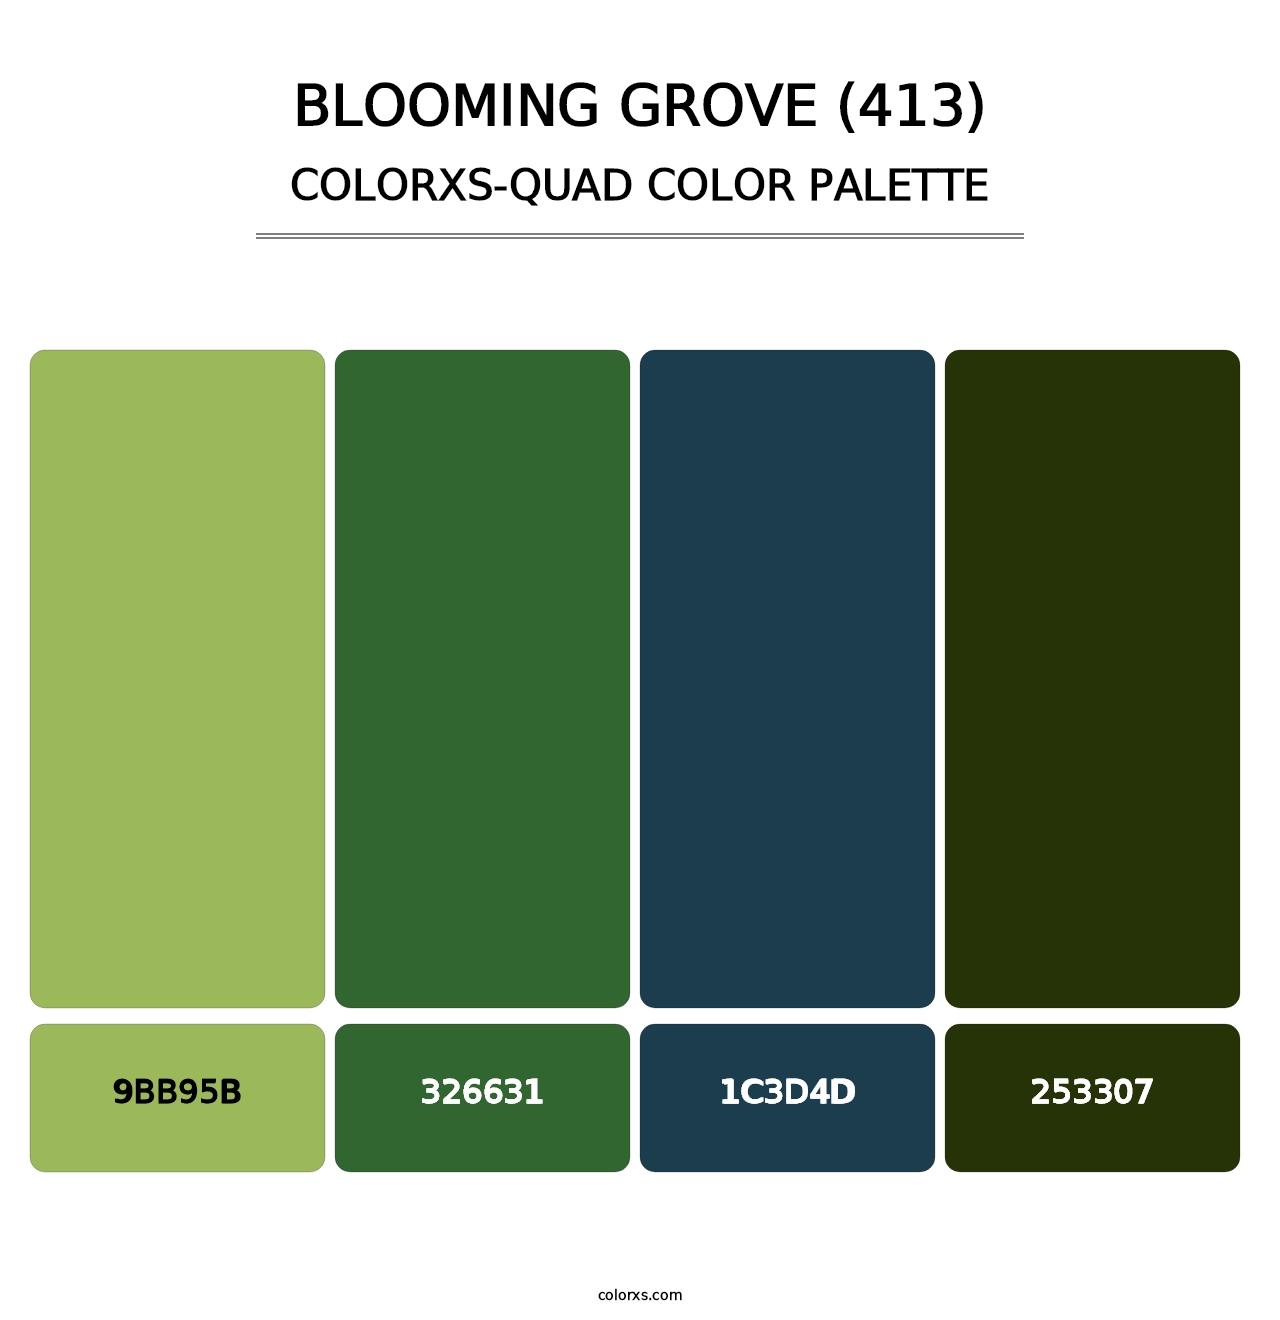 Blooming Grove (413) - Colorxs Quad Palette